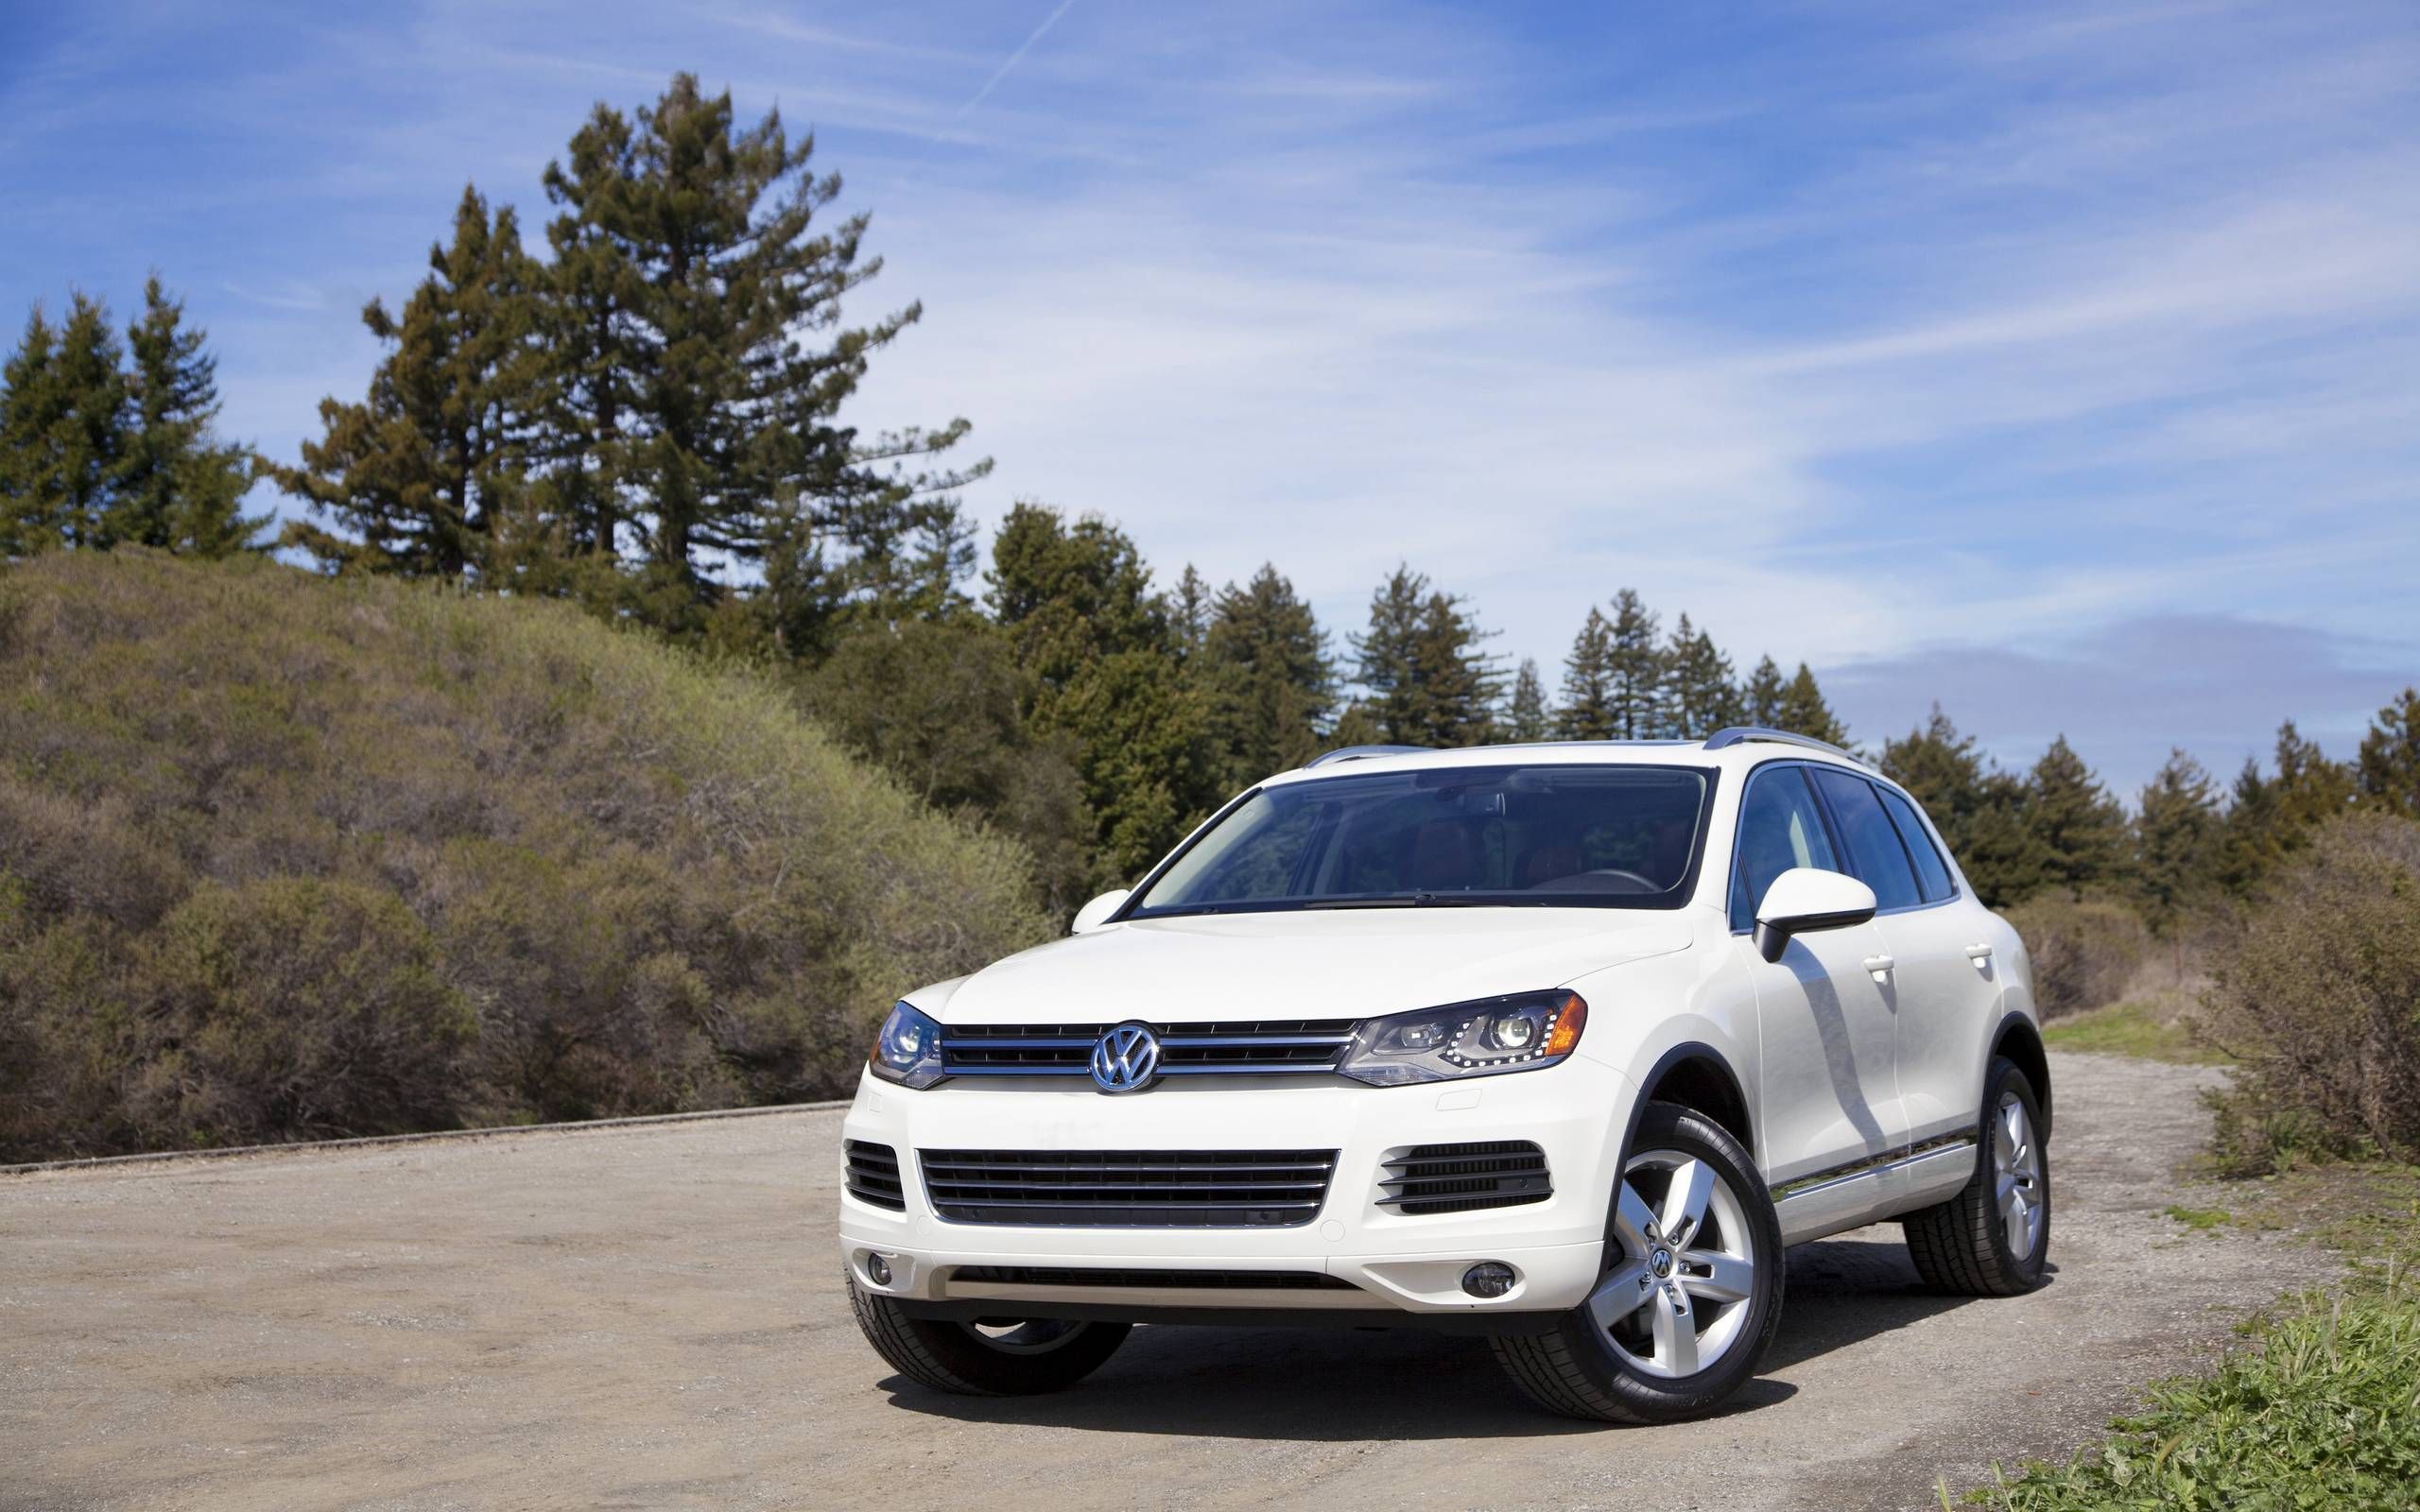 New Volkswagen Touareg Could Be The Nicest VW That America Can't Have